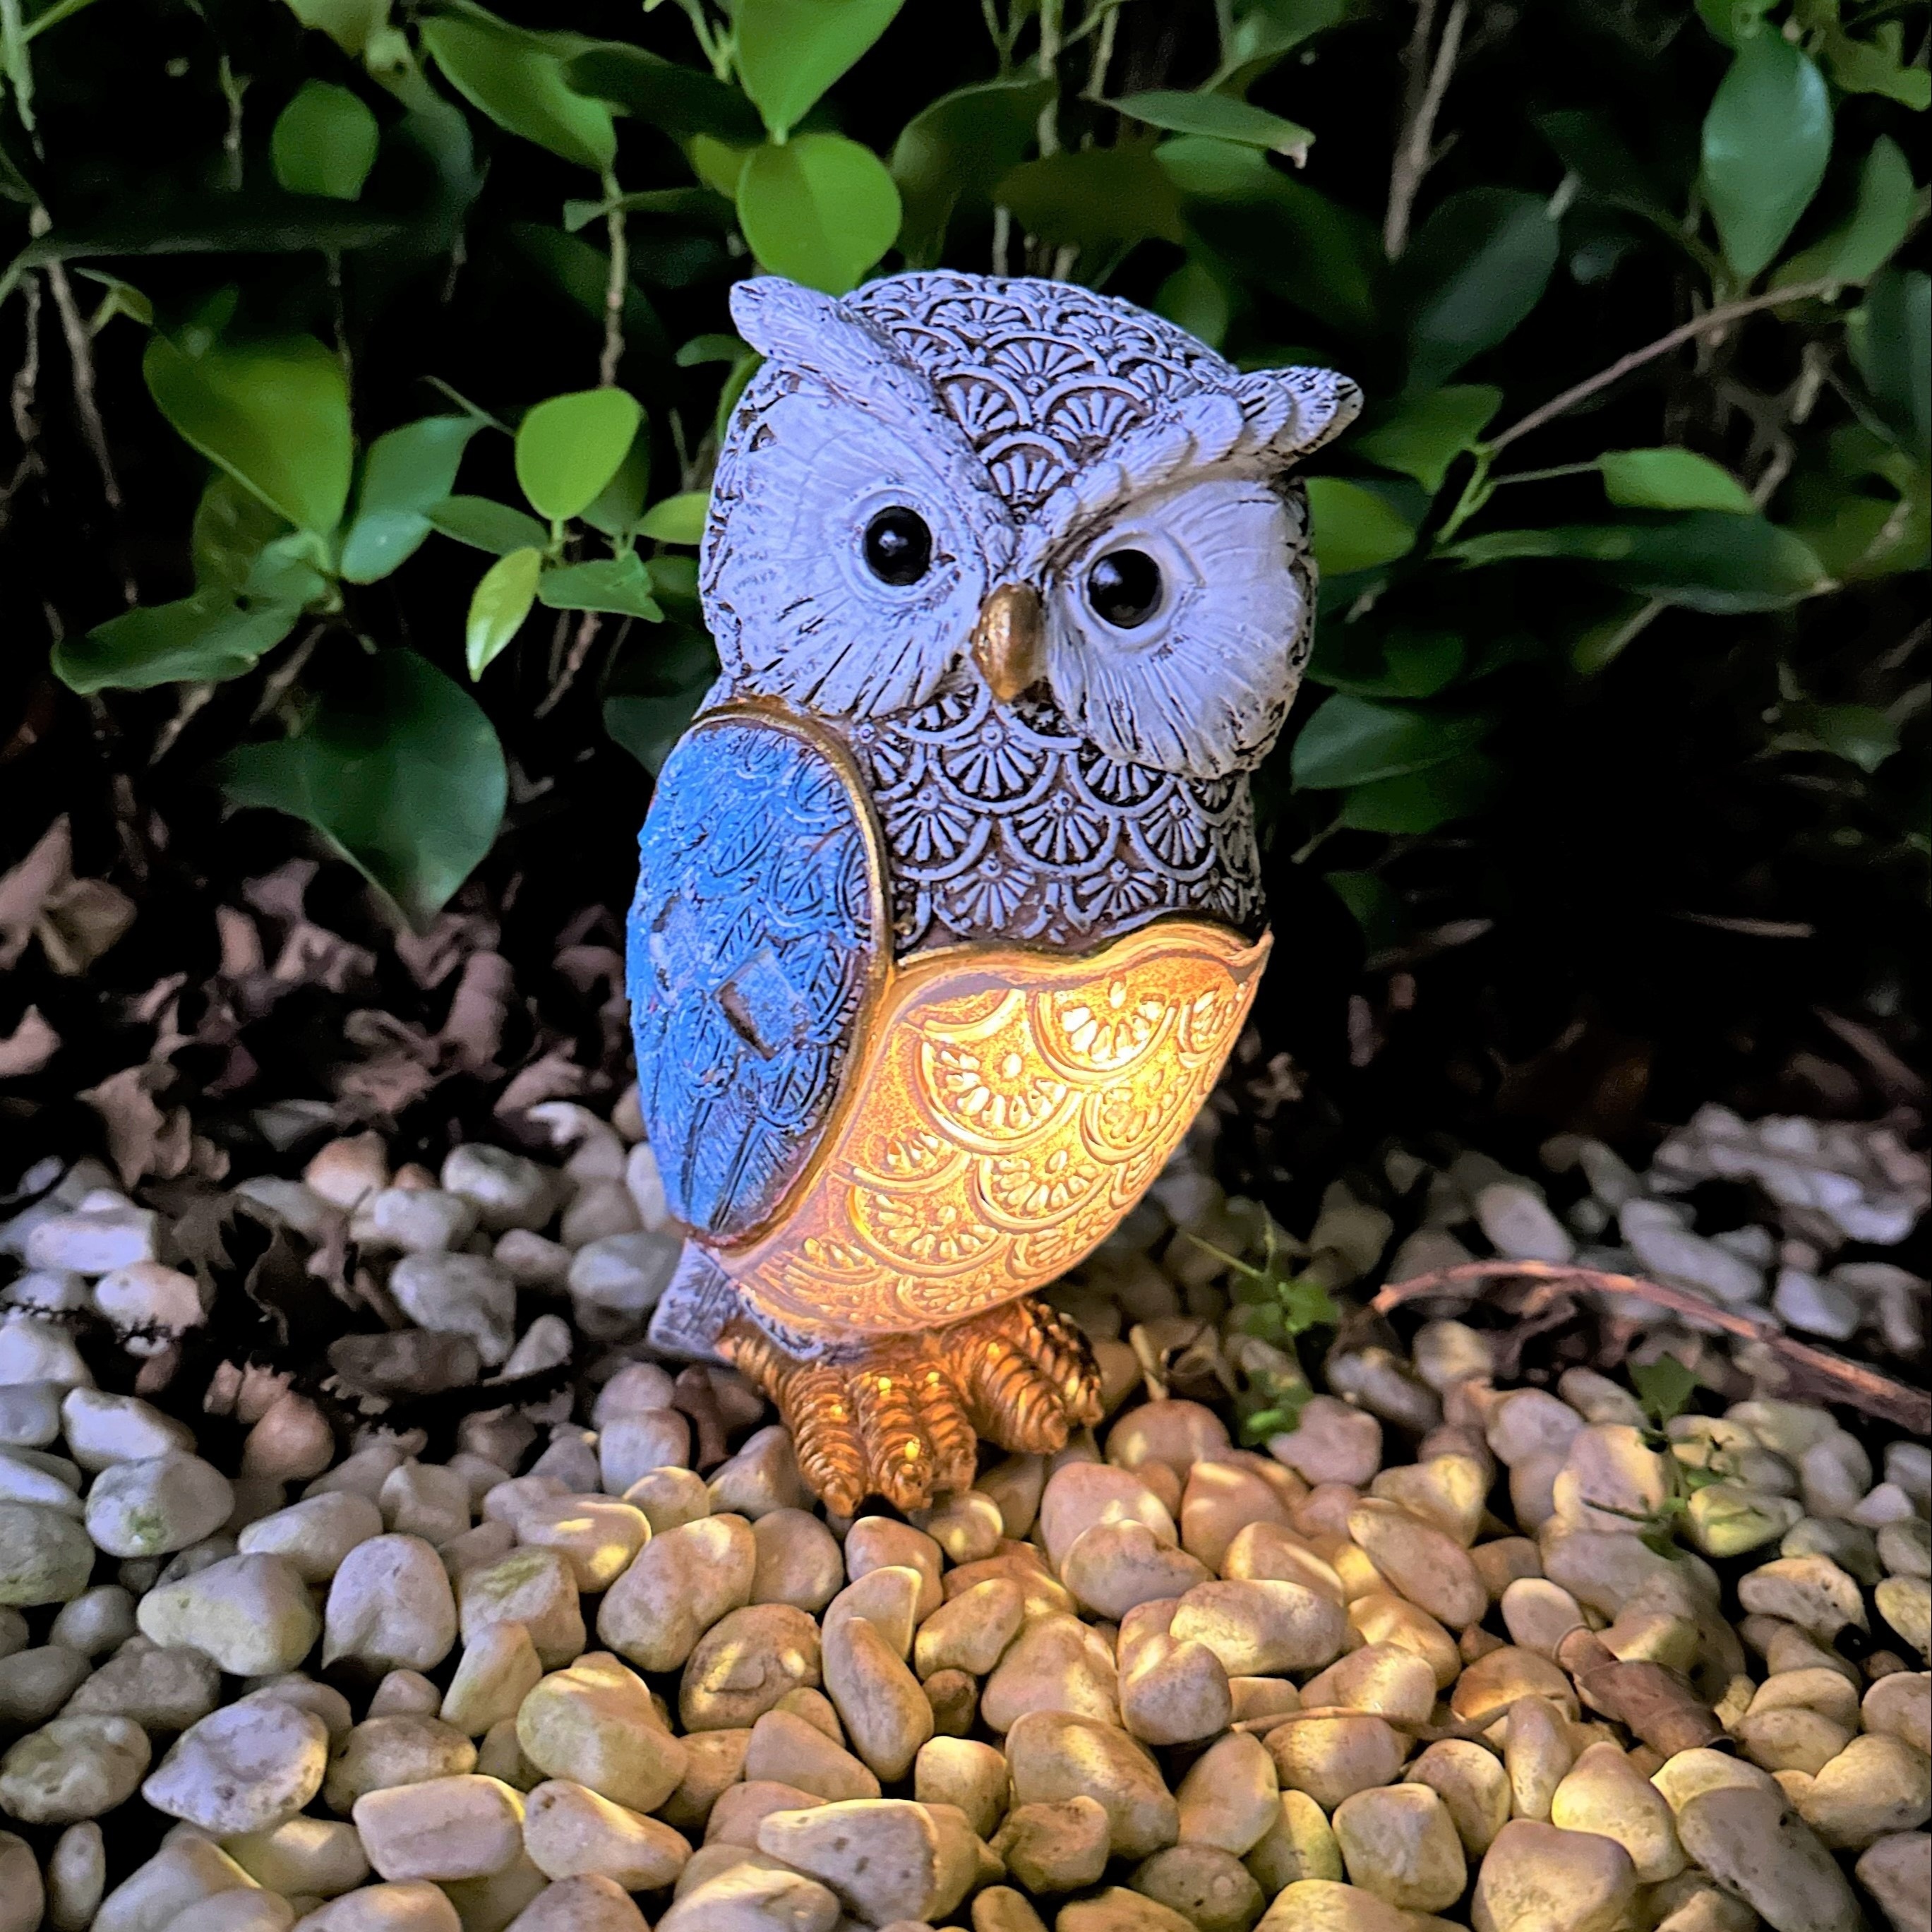 

1pc Wrought Iron Hollow Projection Owl Resin Solar Lantern, Suitable For Garden, Courtyard, Lawn, Doorway, Pond, Balcony, Window Sill, Special Gift For Friends On Holidays